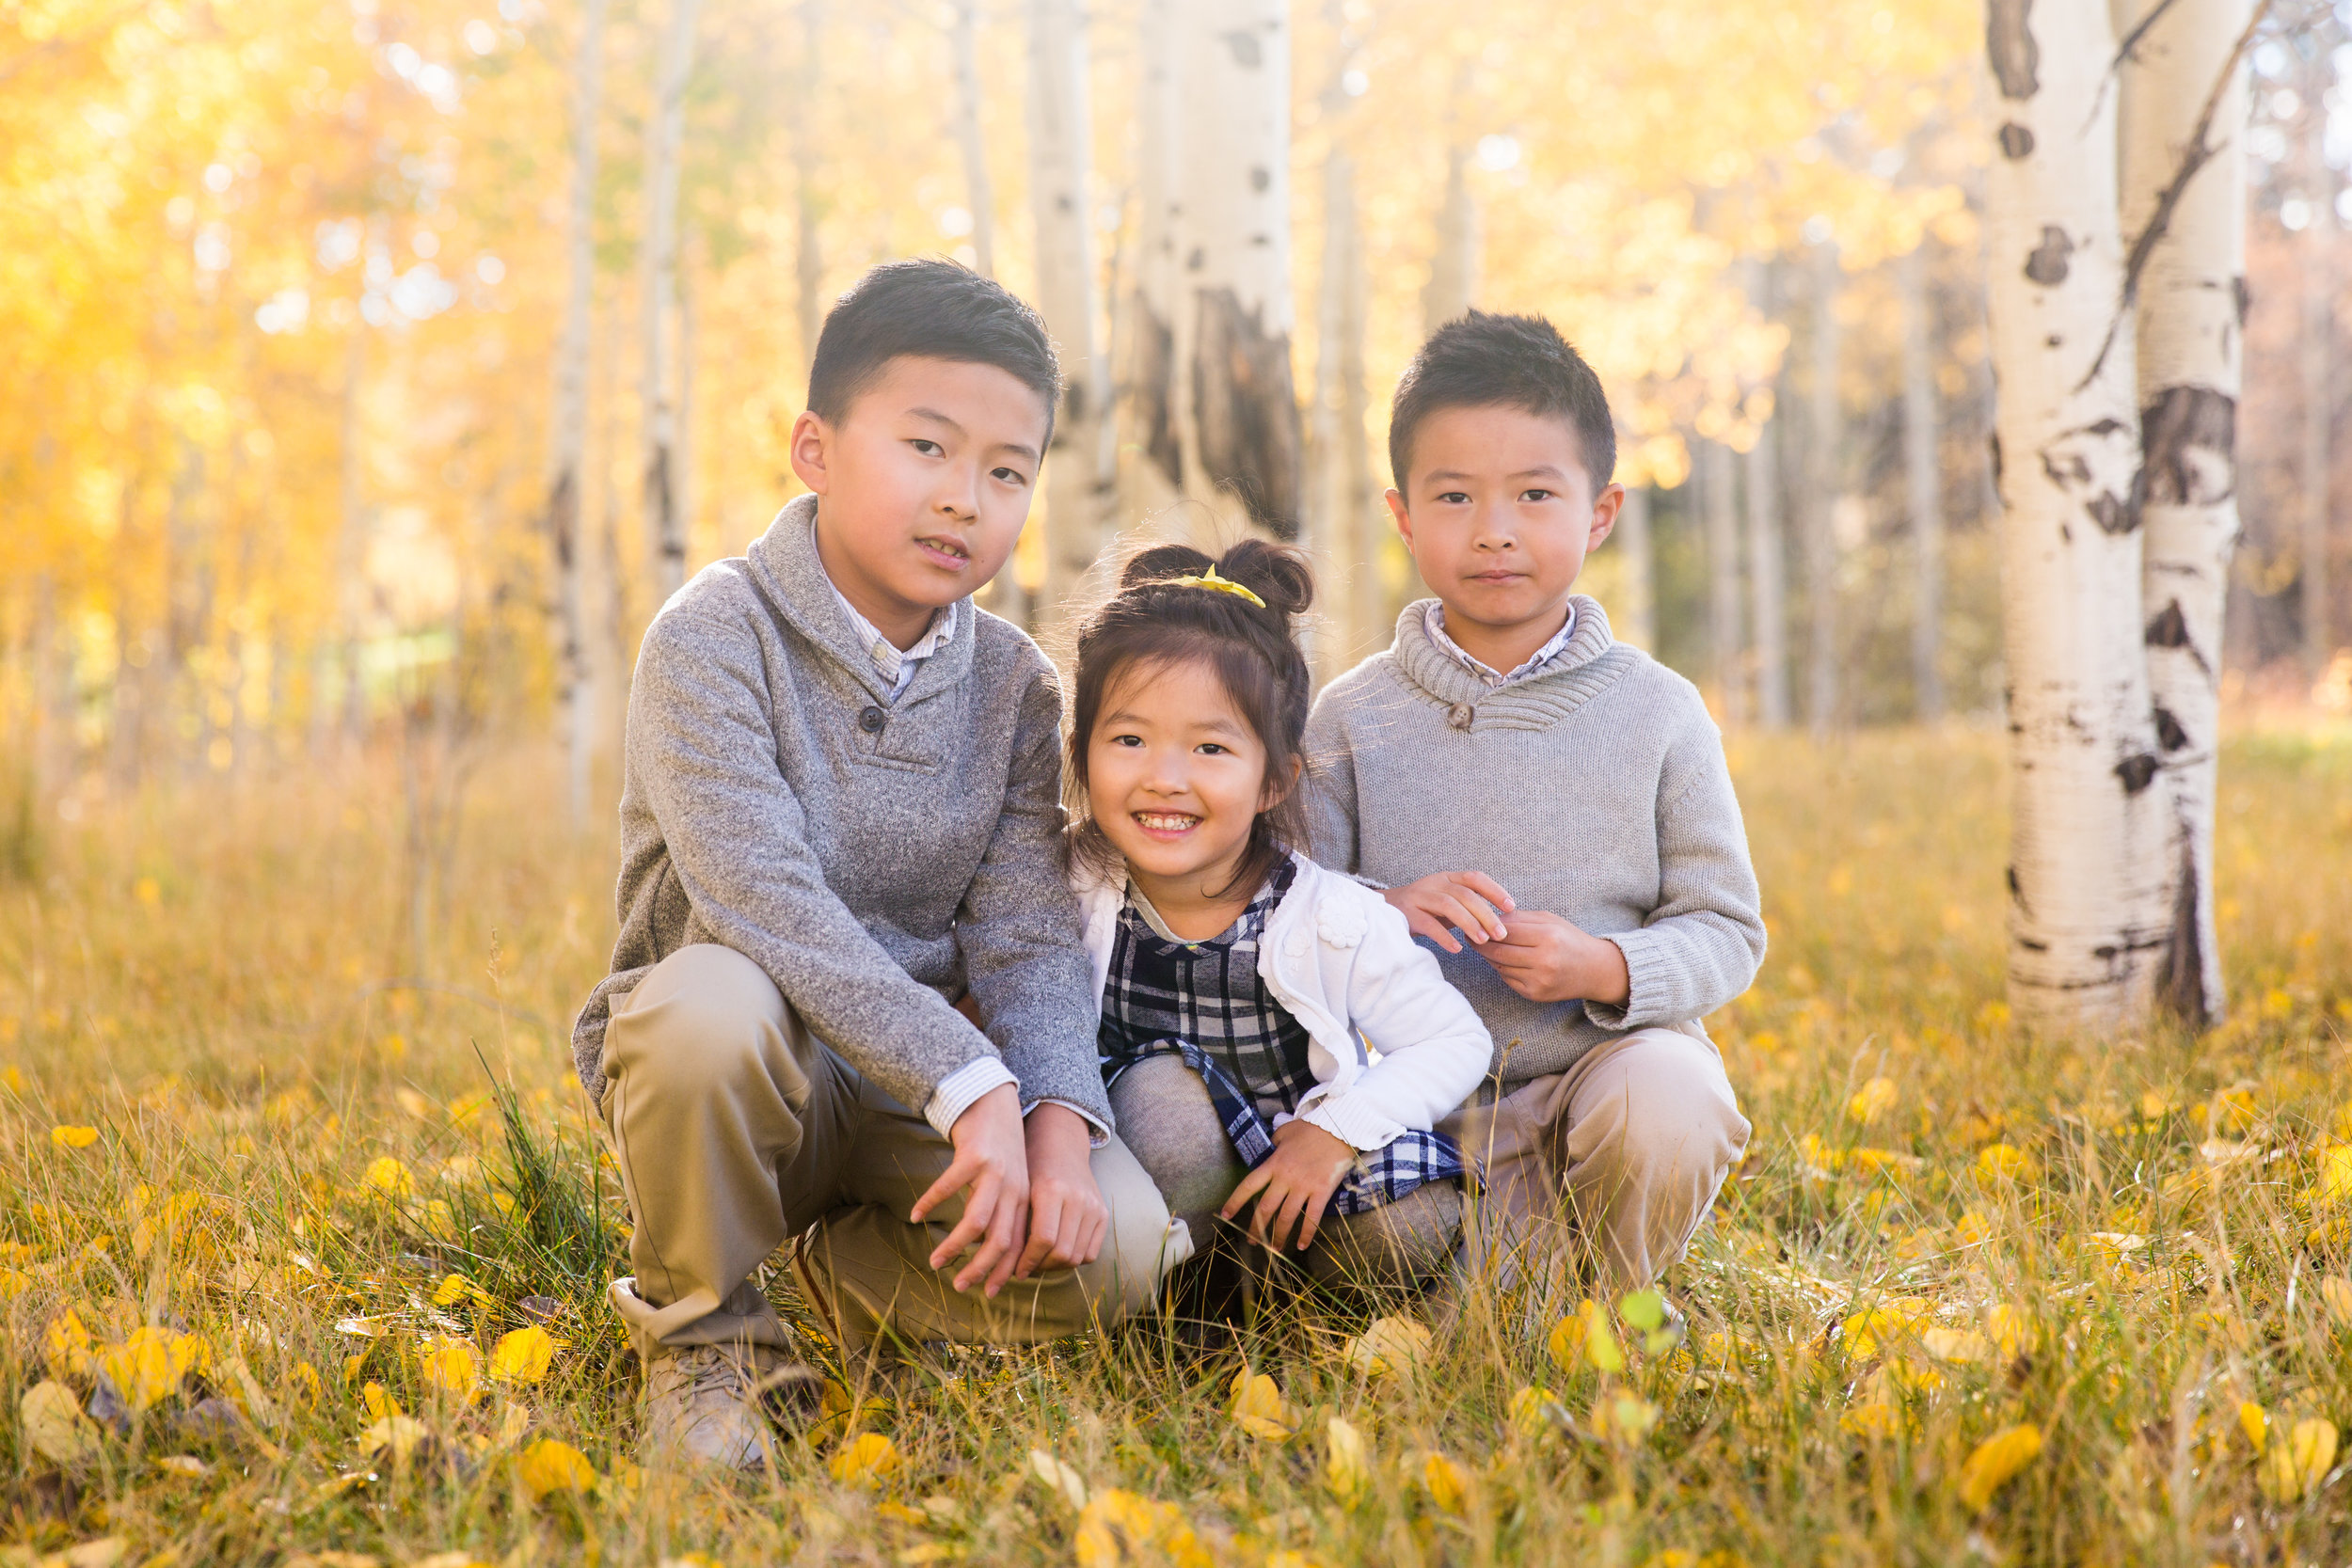 Telluride Family Photography - Fall 2